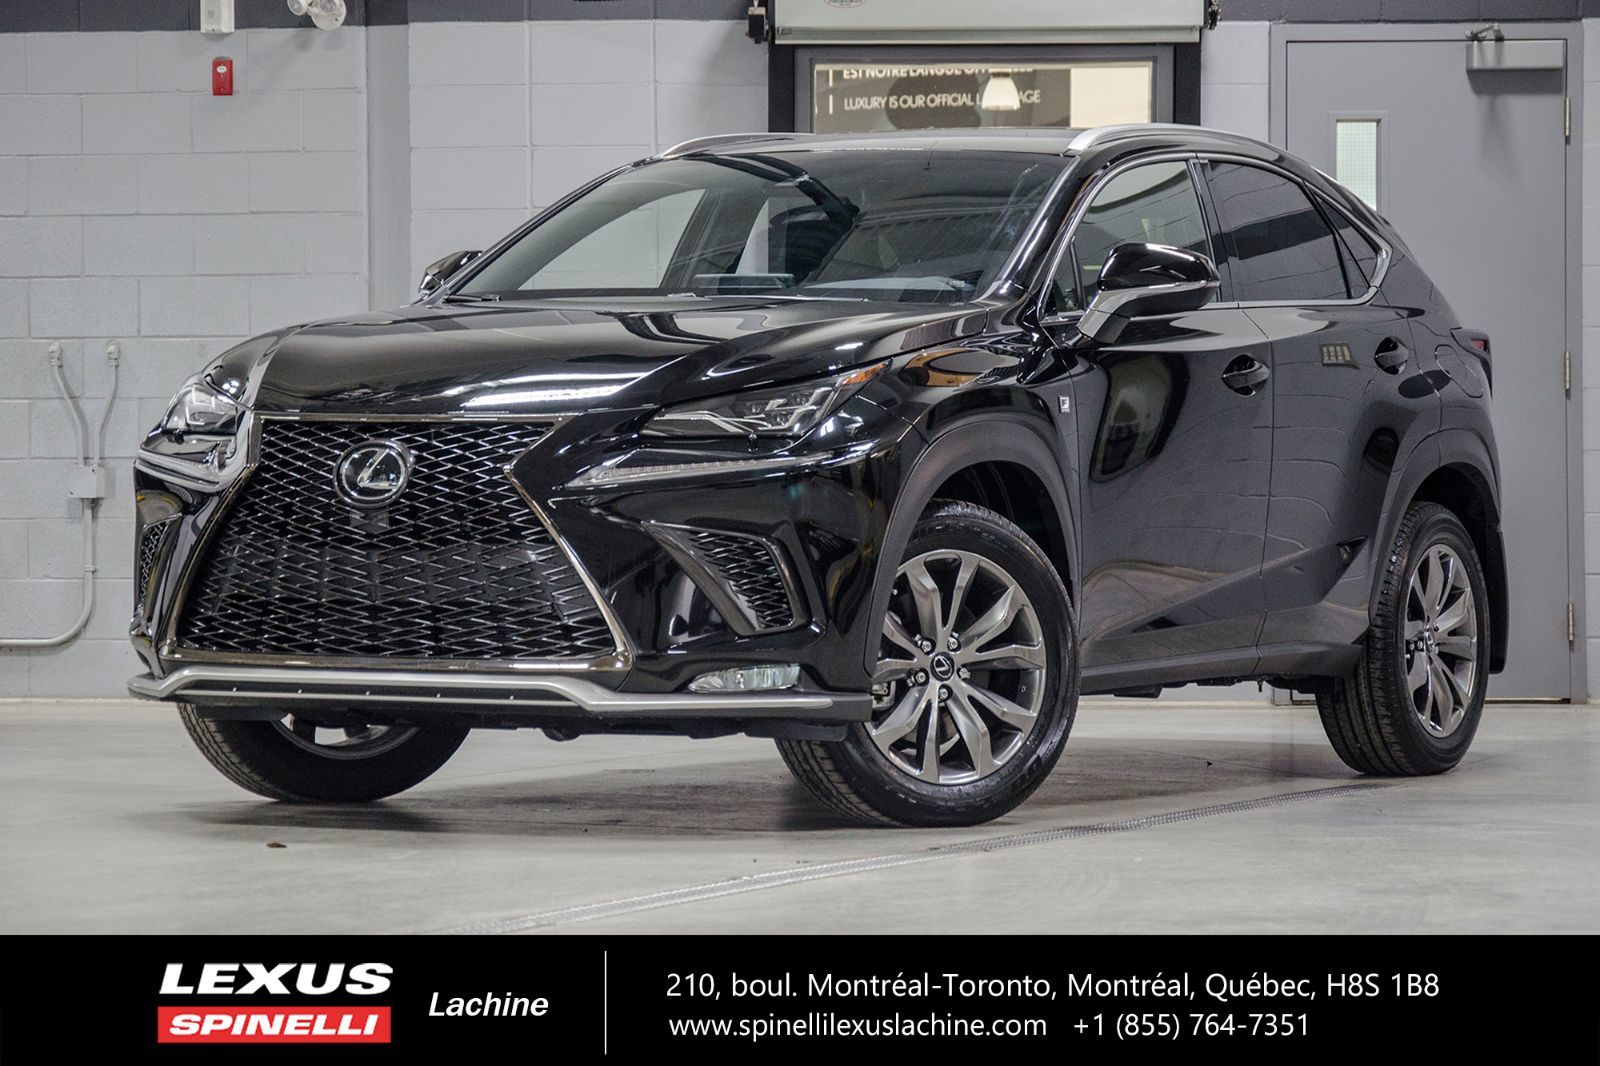 2020 Lexus Nx 300 F Sport I Awd Cuir Toit Carplay Lss 8 Used For Sale In 544 Demo Rebate Off Msrp Lachine